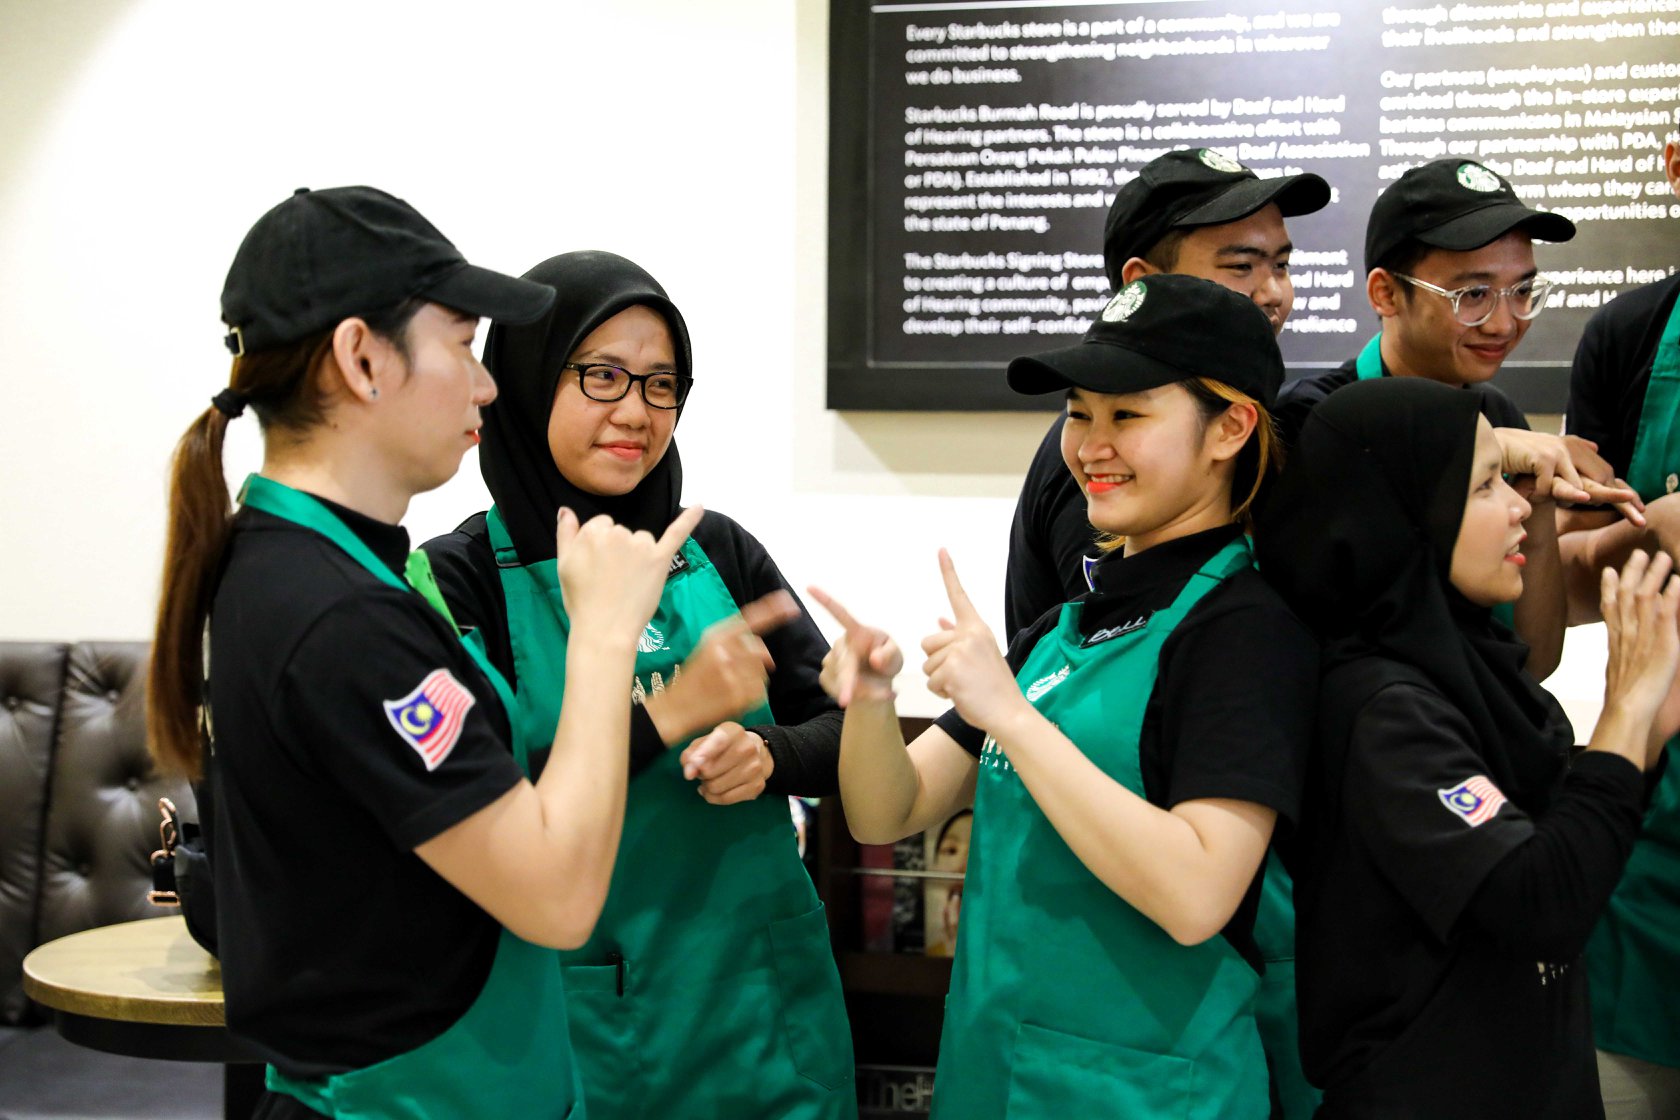 Starbucks staff signing each other